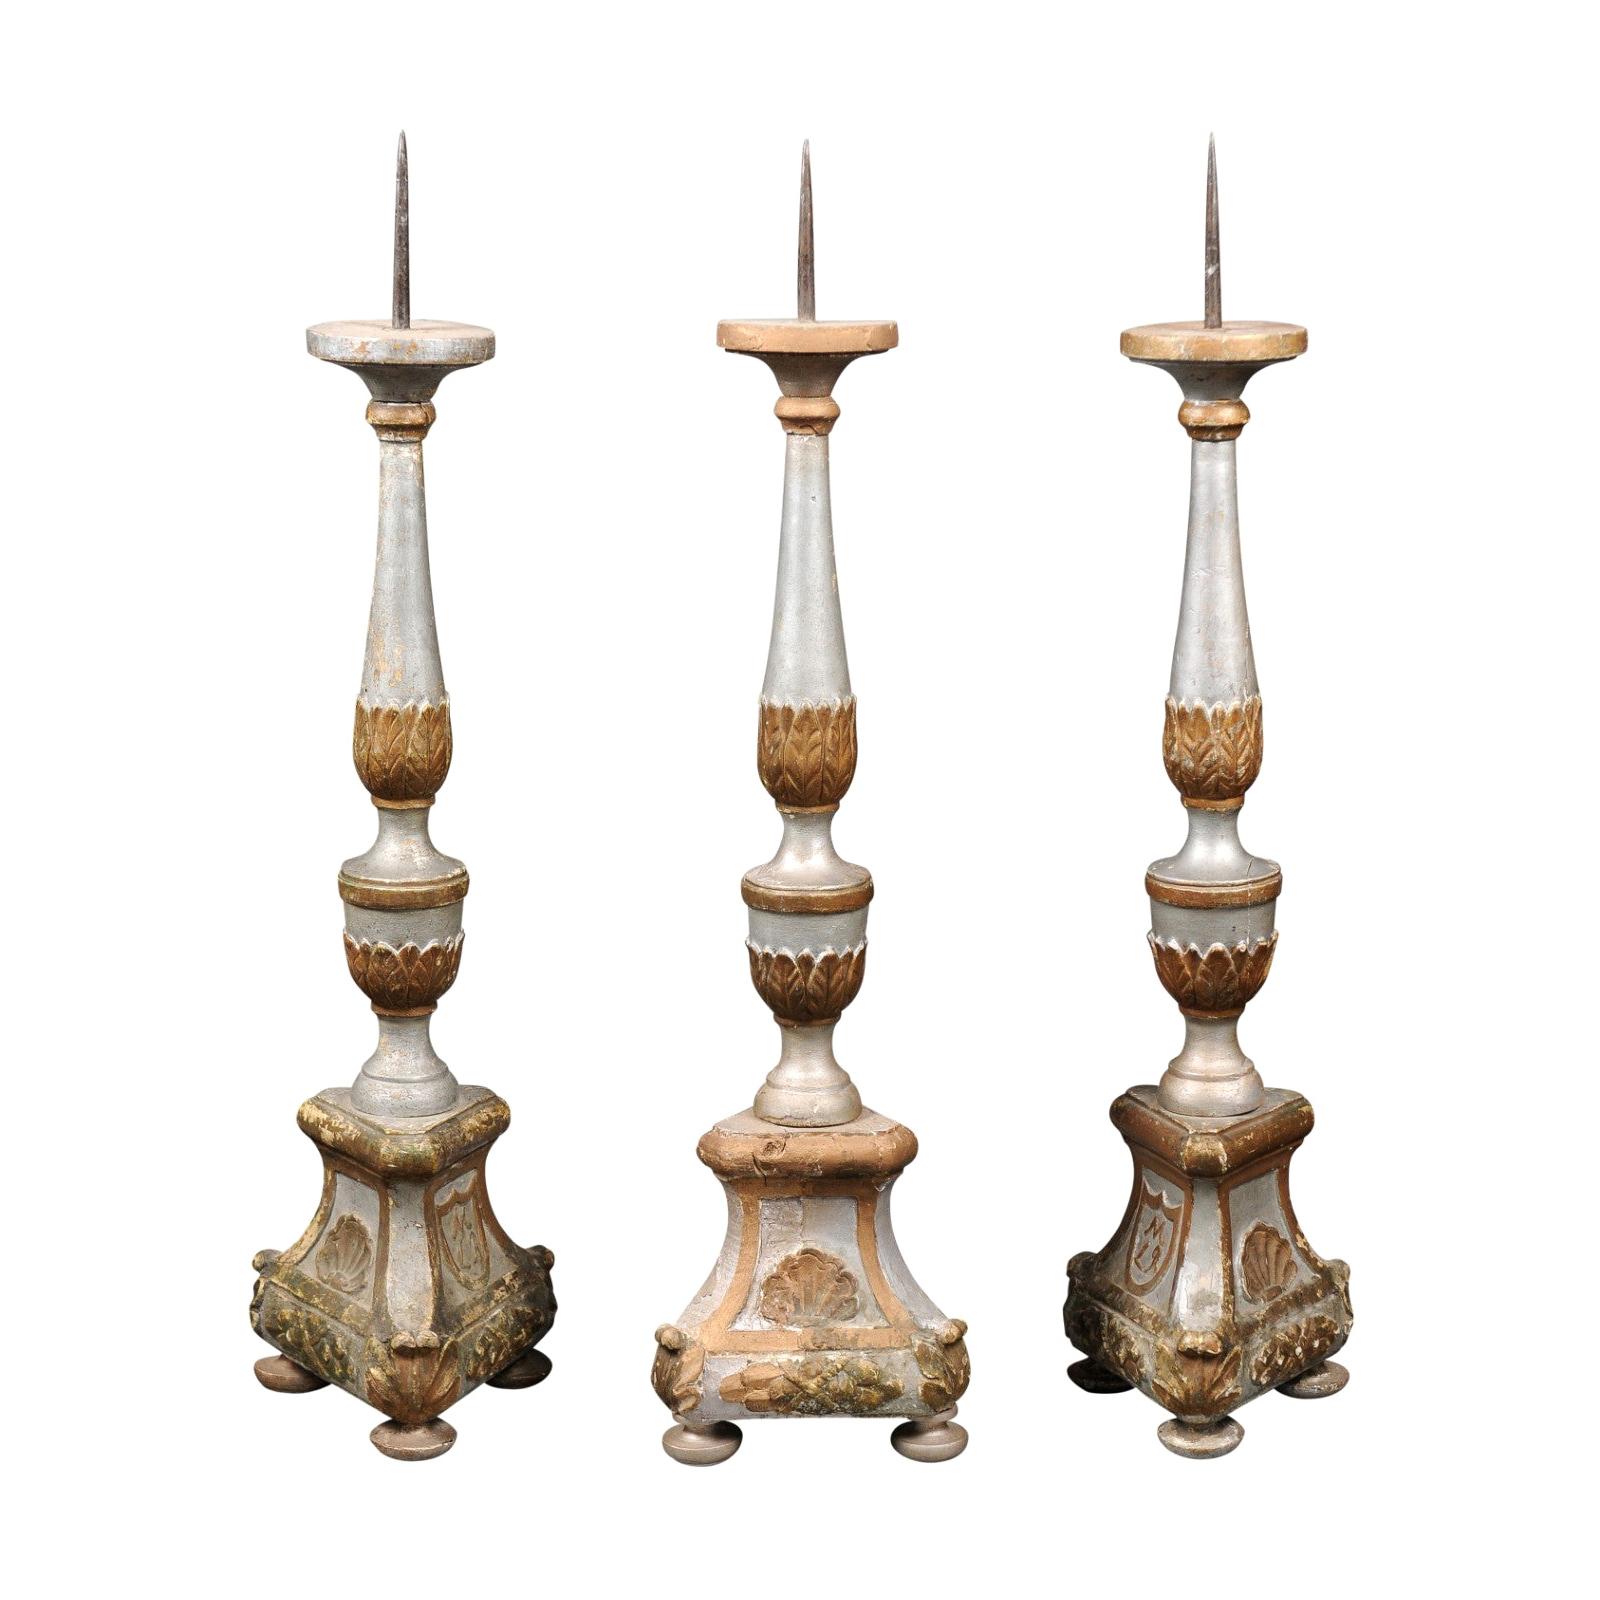 Italian 18th Century Silver Gilt Candlesticks with Painted and Carved Motifs